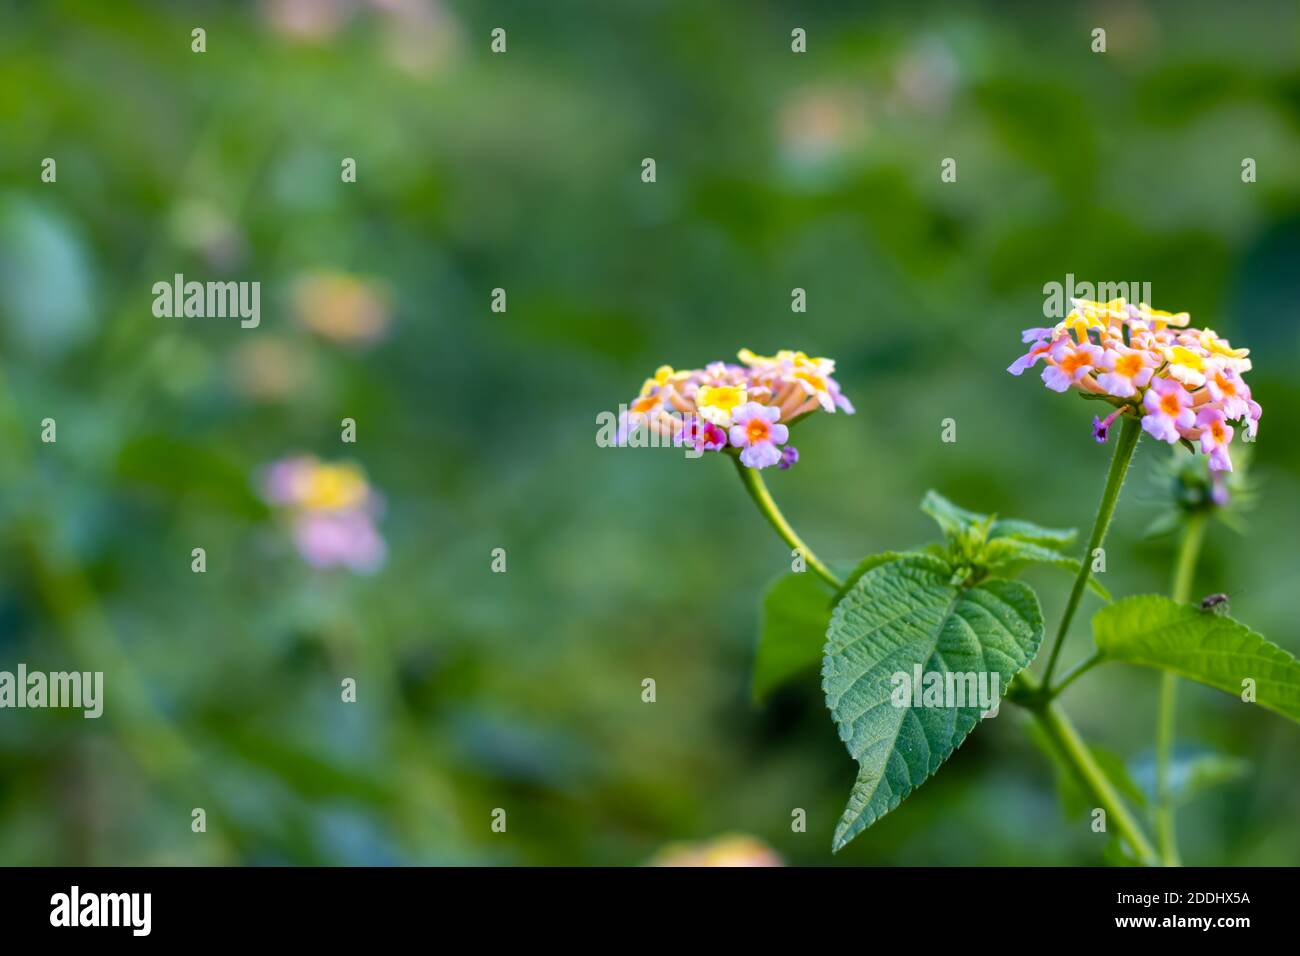 West indian colorful multicolor lantana flower with leaves Stock Photo